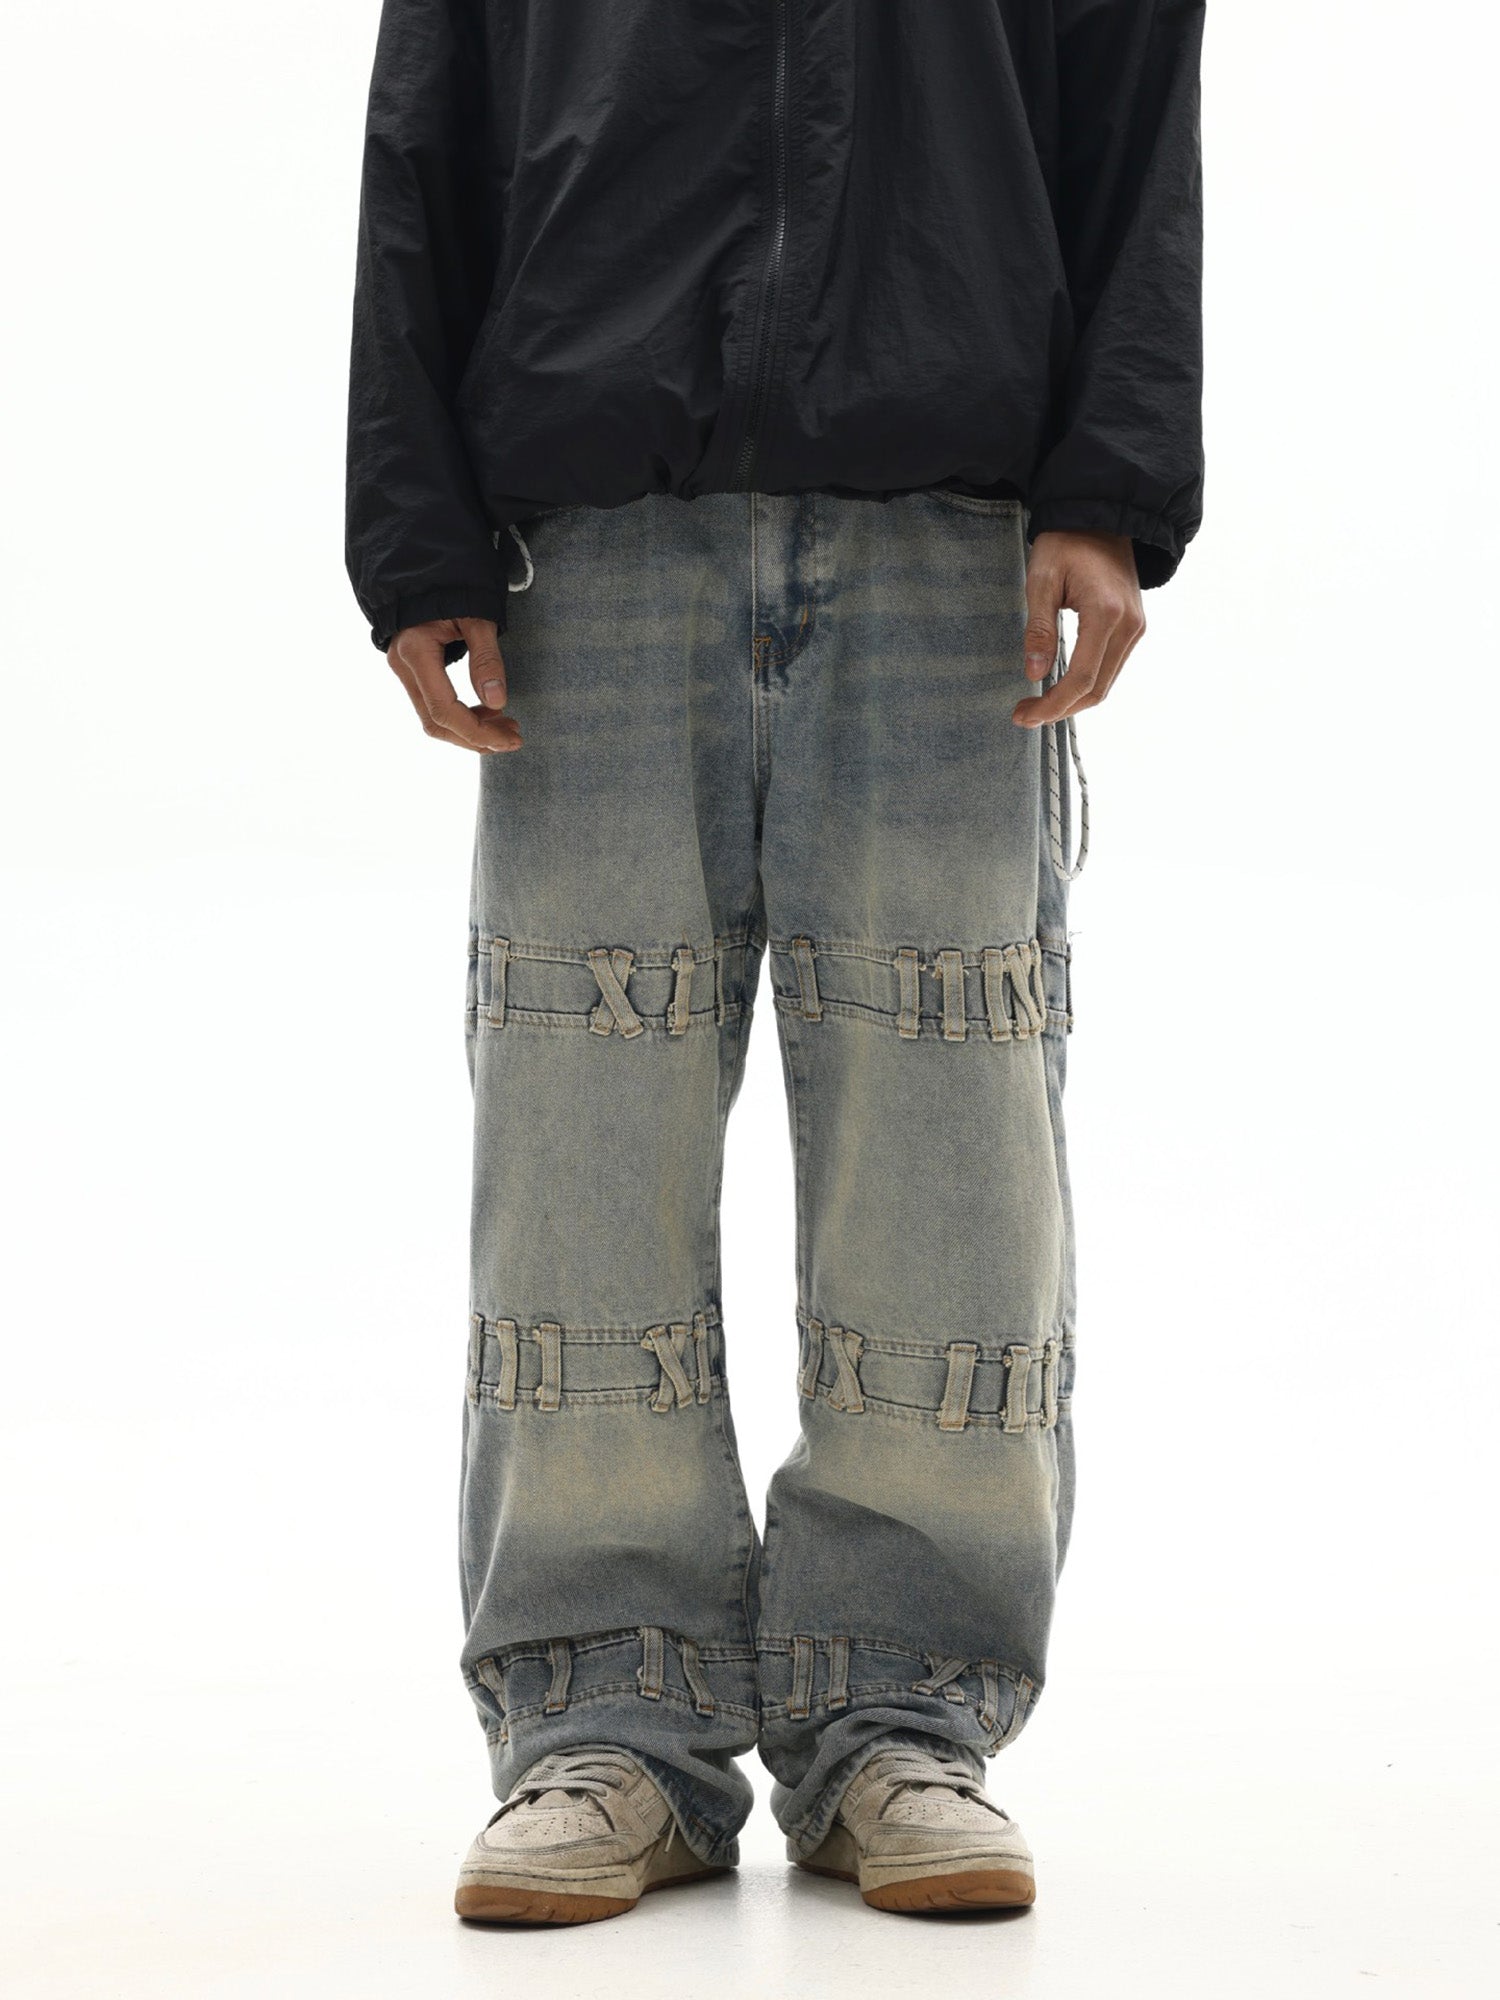 Street Fashion Creative Trouser Loop Design Washed Jeans